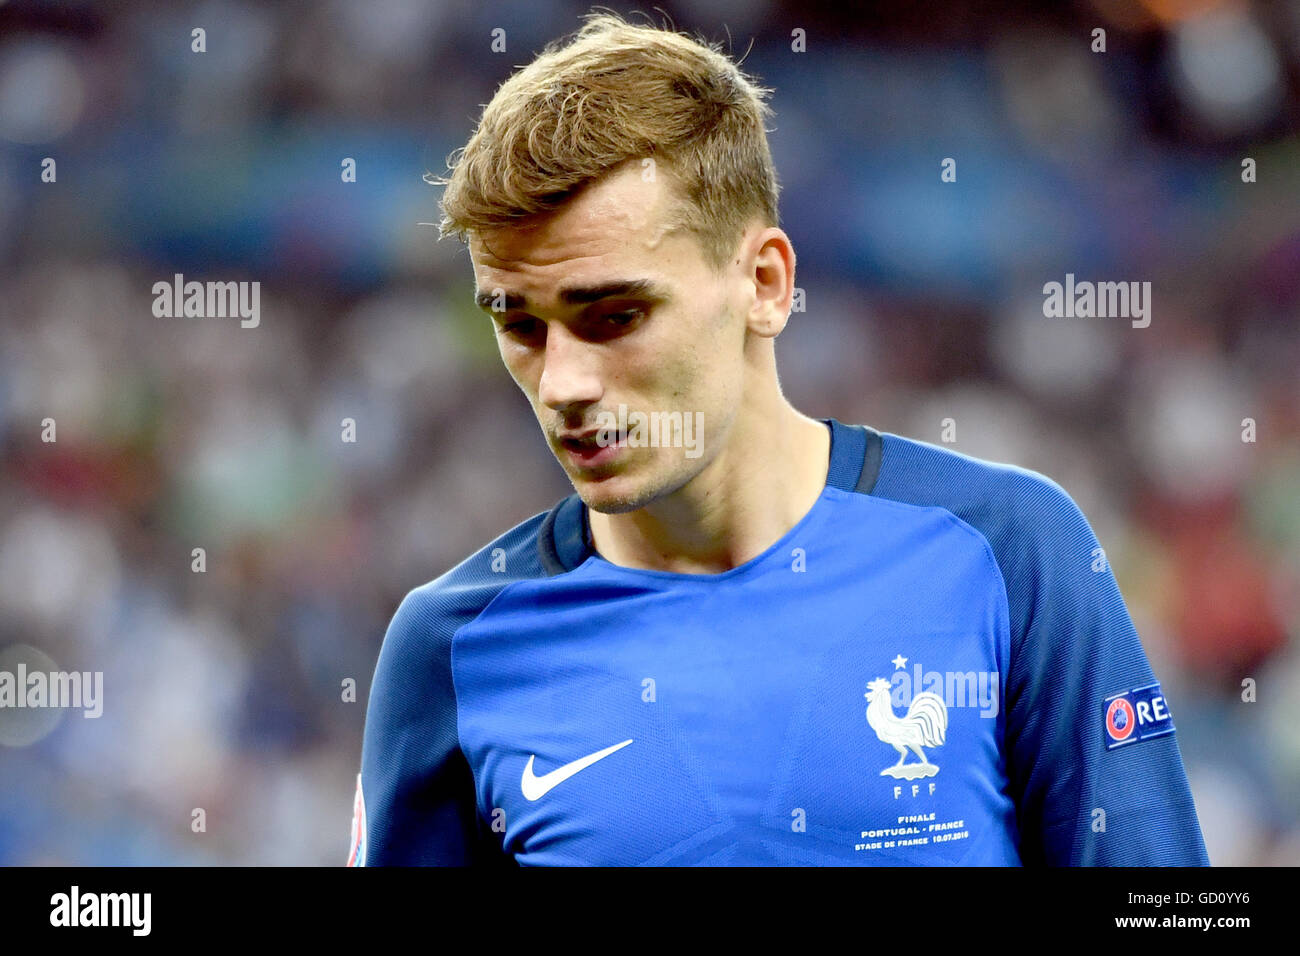 Antoine Griezmann Of France Reacts During The Uefa Euro 2016 Soccer Final Match Between Portugal And